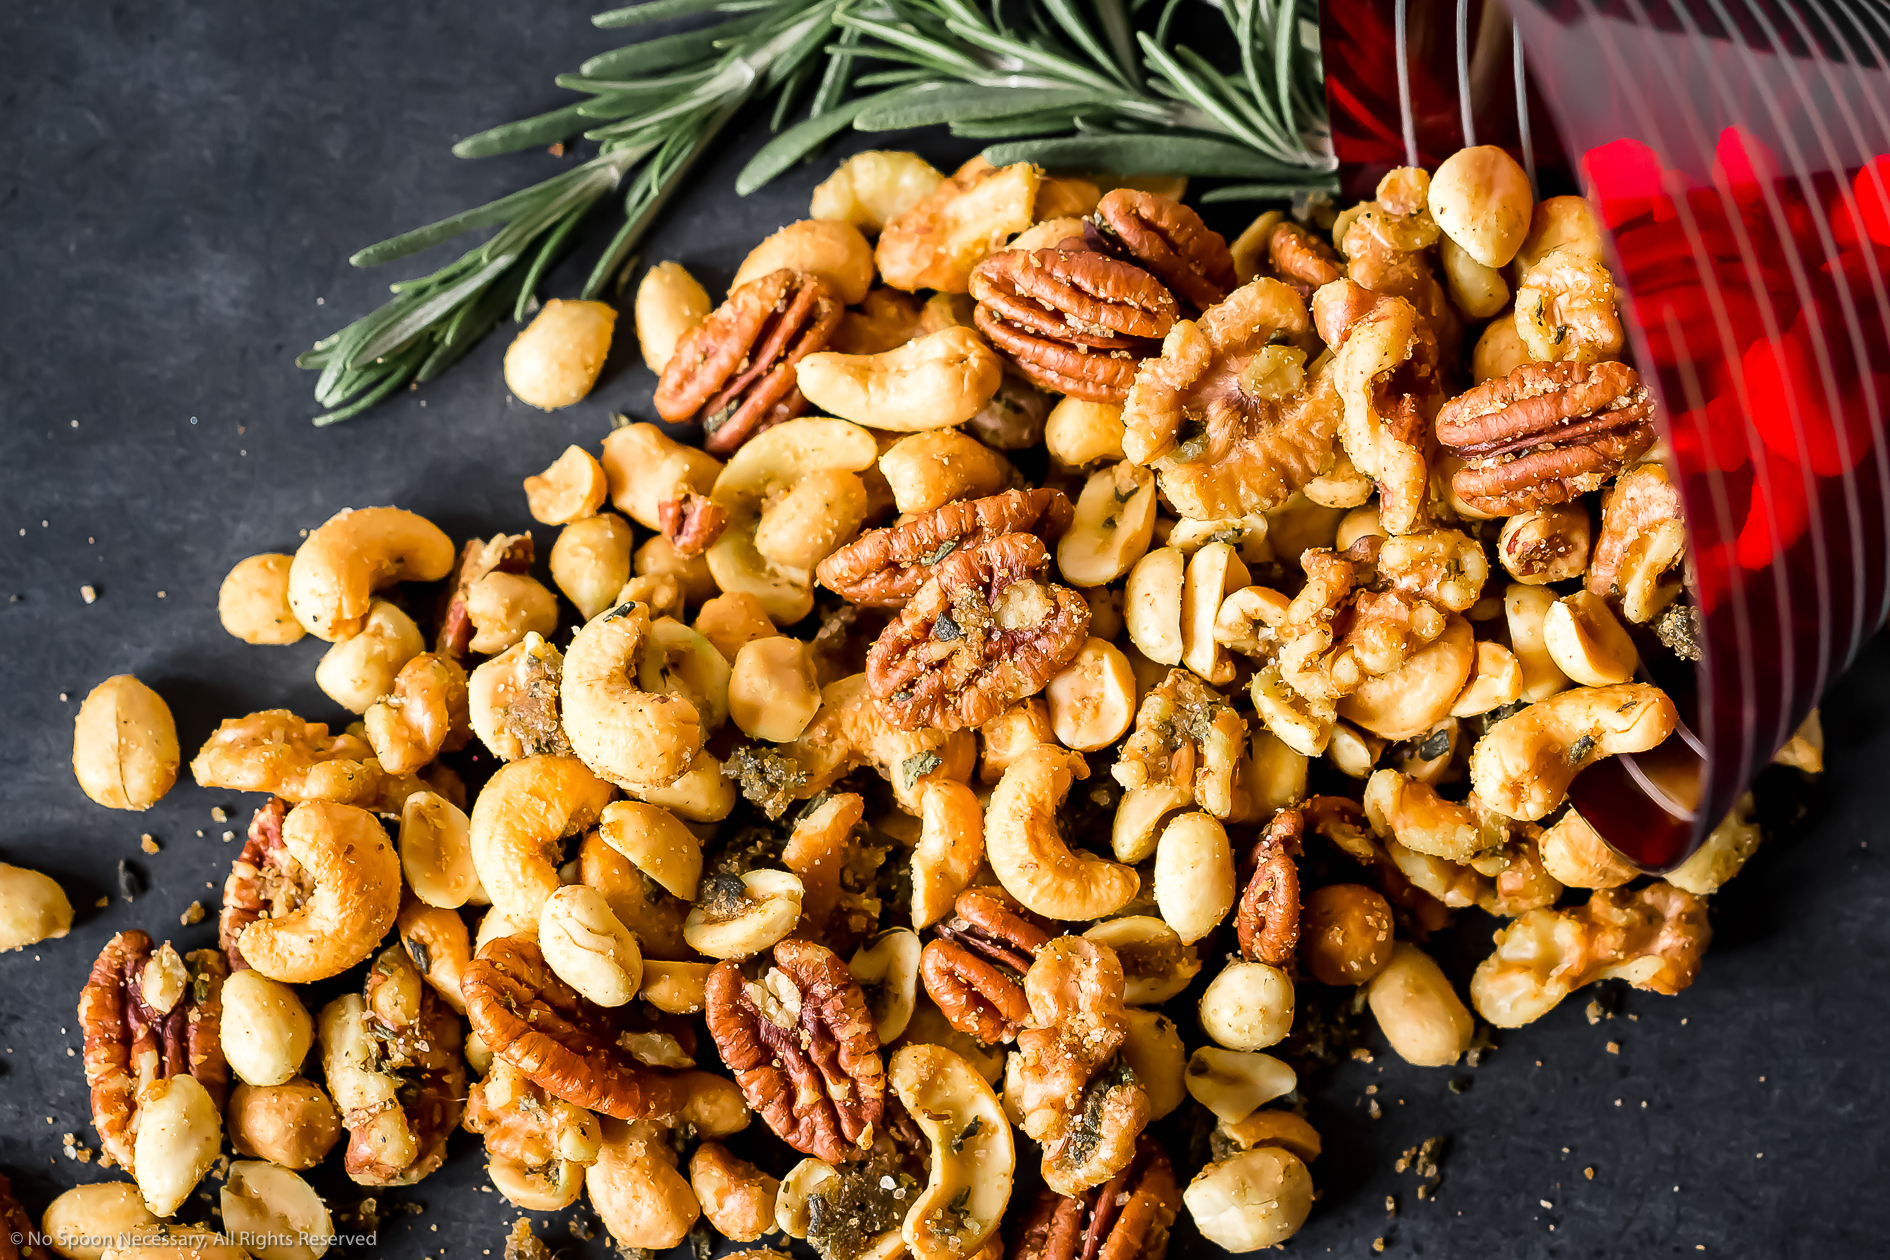 Sweet & Savory Roasted Party Nuts - The Delicious Crescent